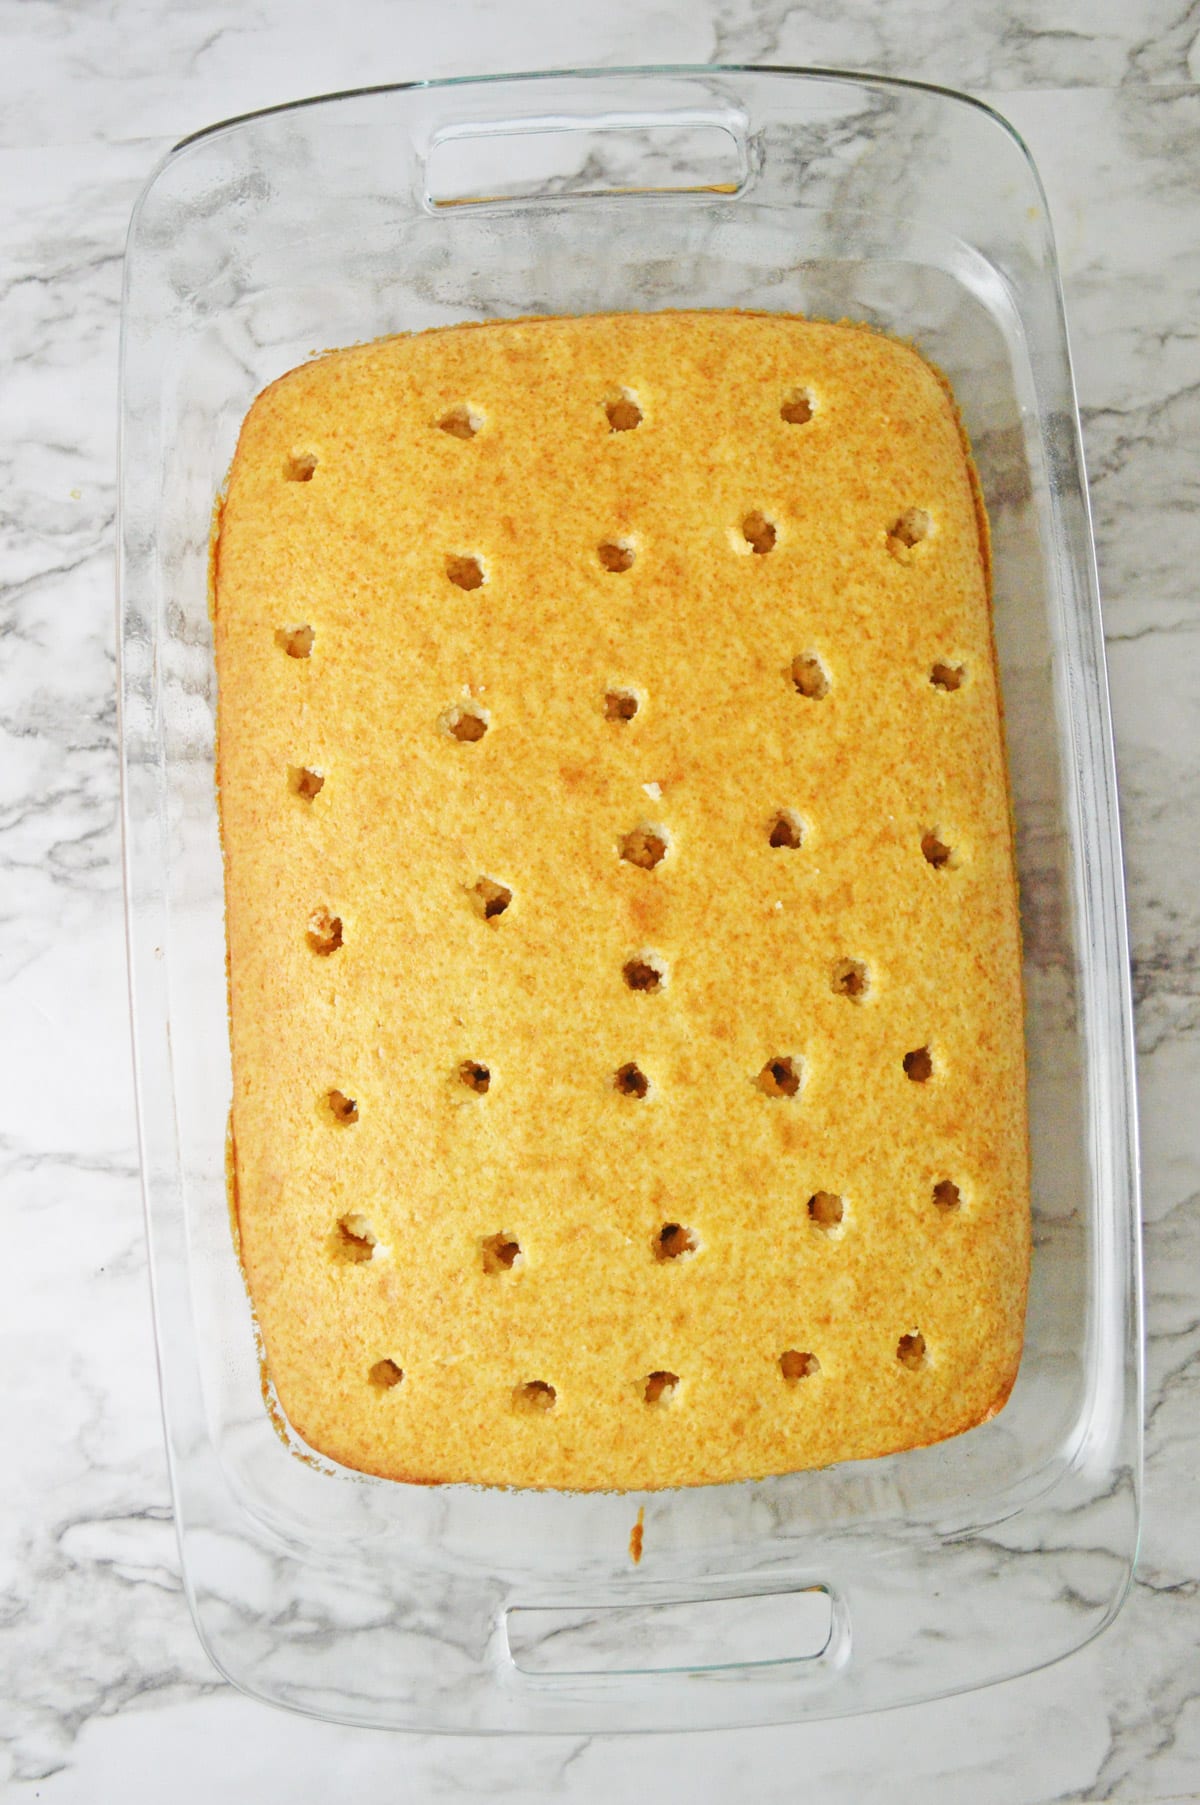 Rectangular cake with holes poked in it